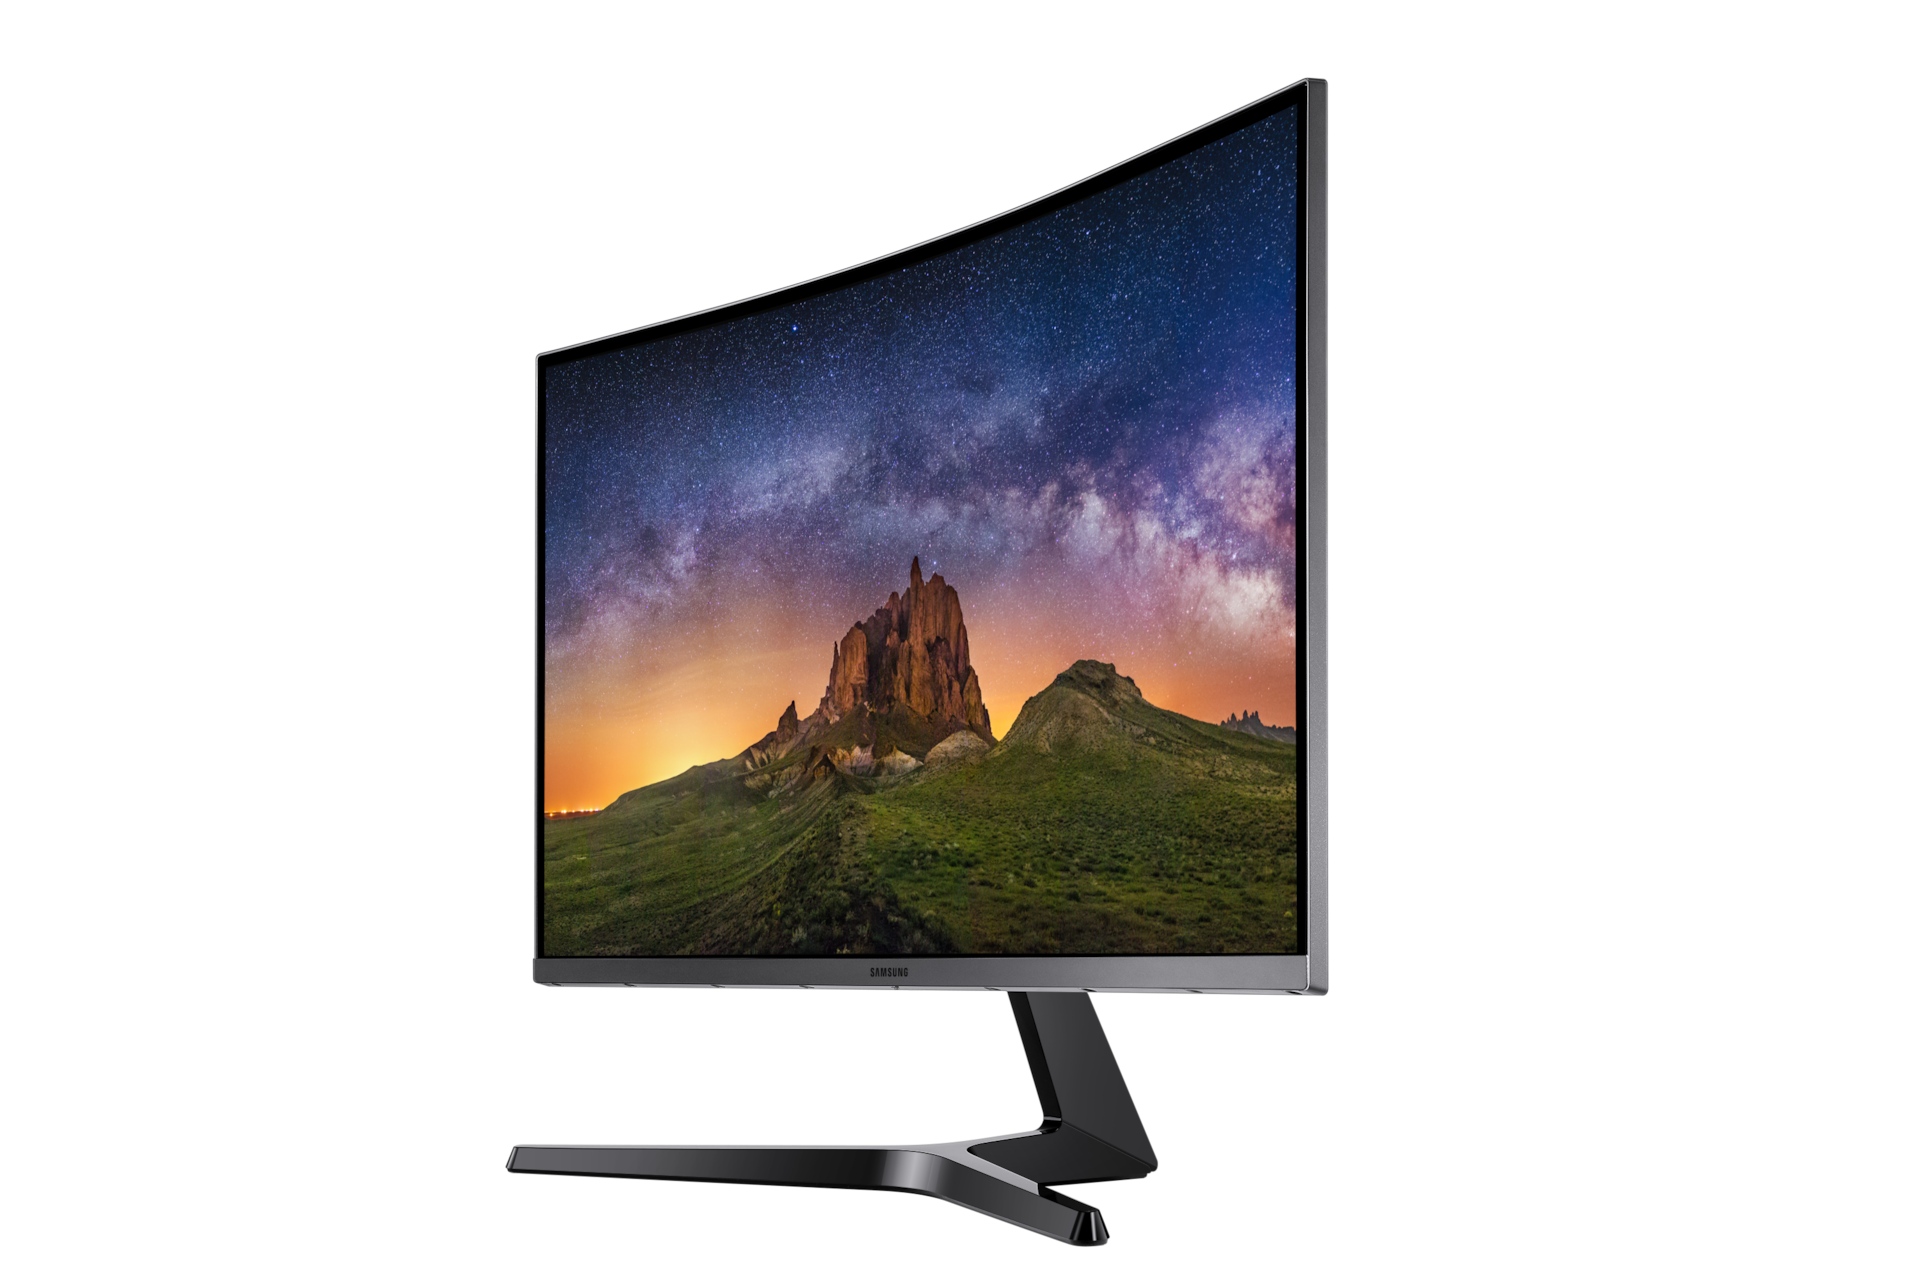 Cool Are Curved Monitors Ok For Photo Editing with Futuristic Setup